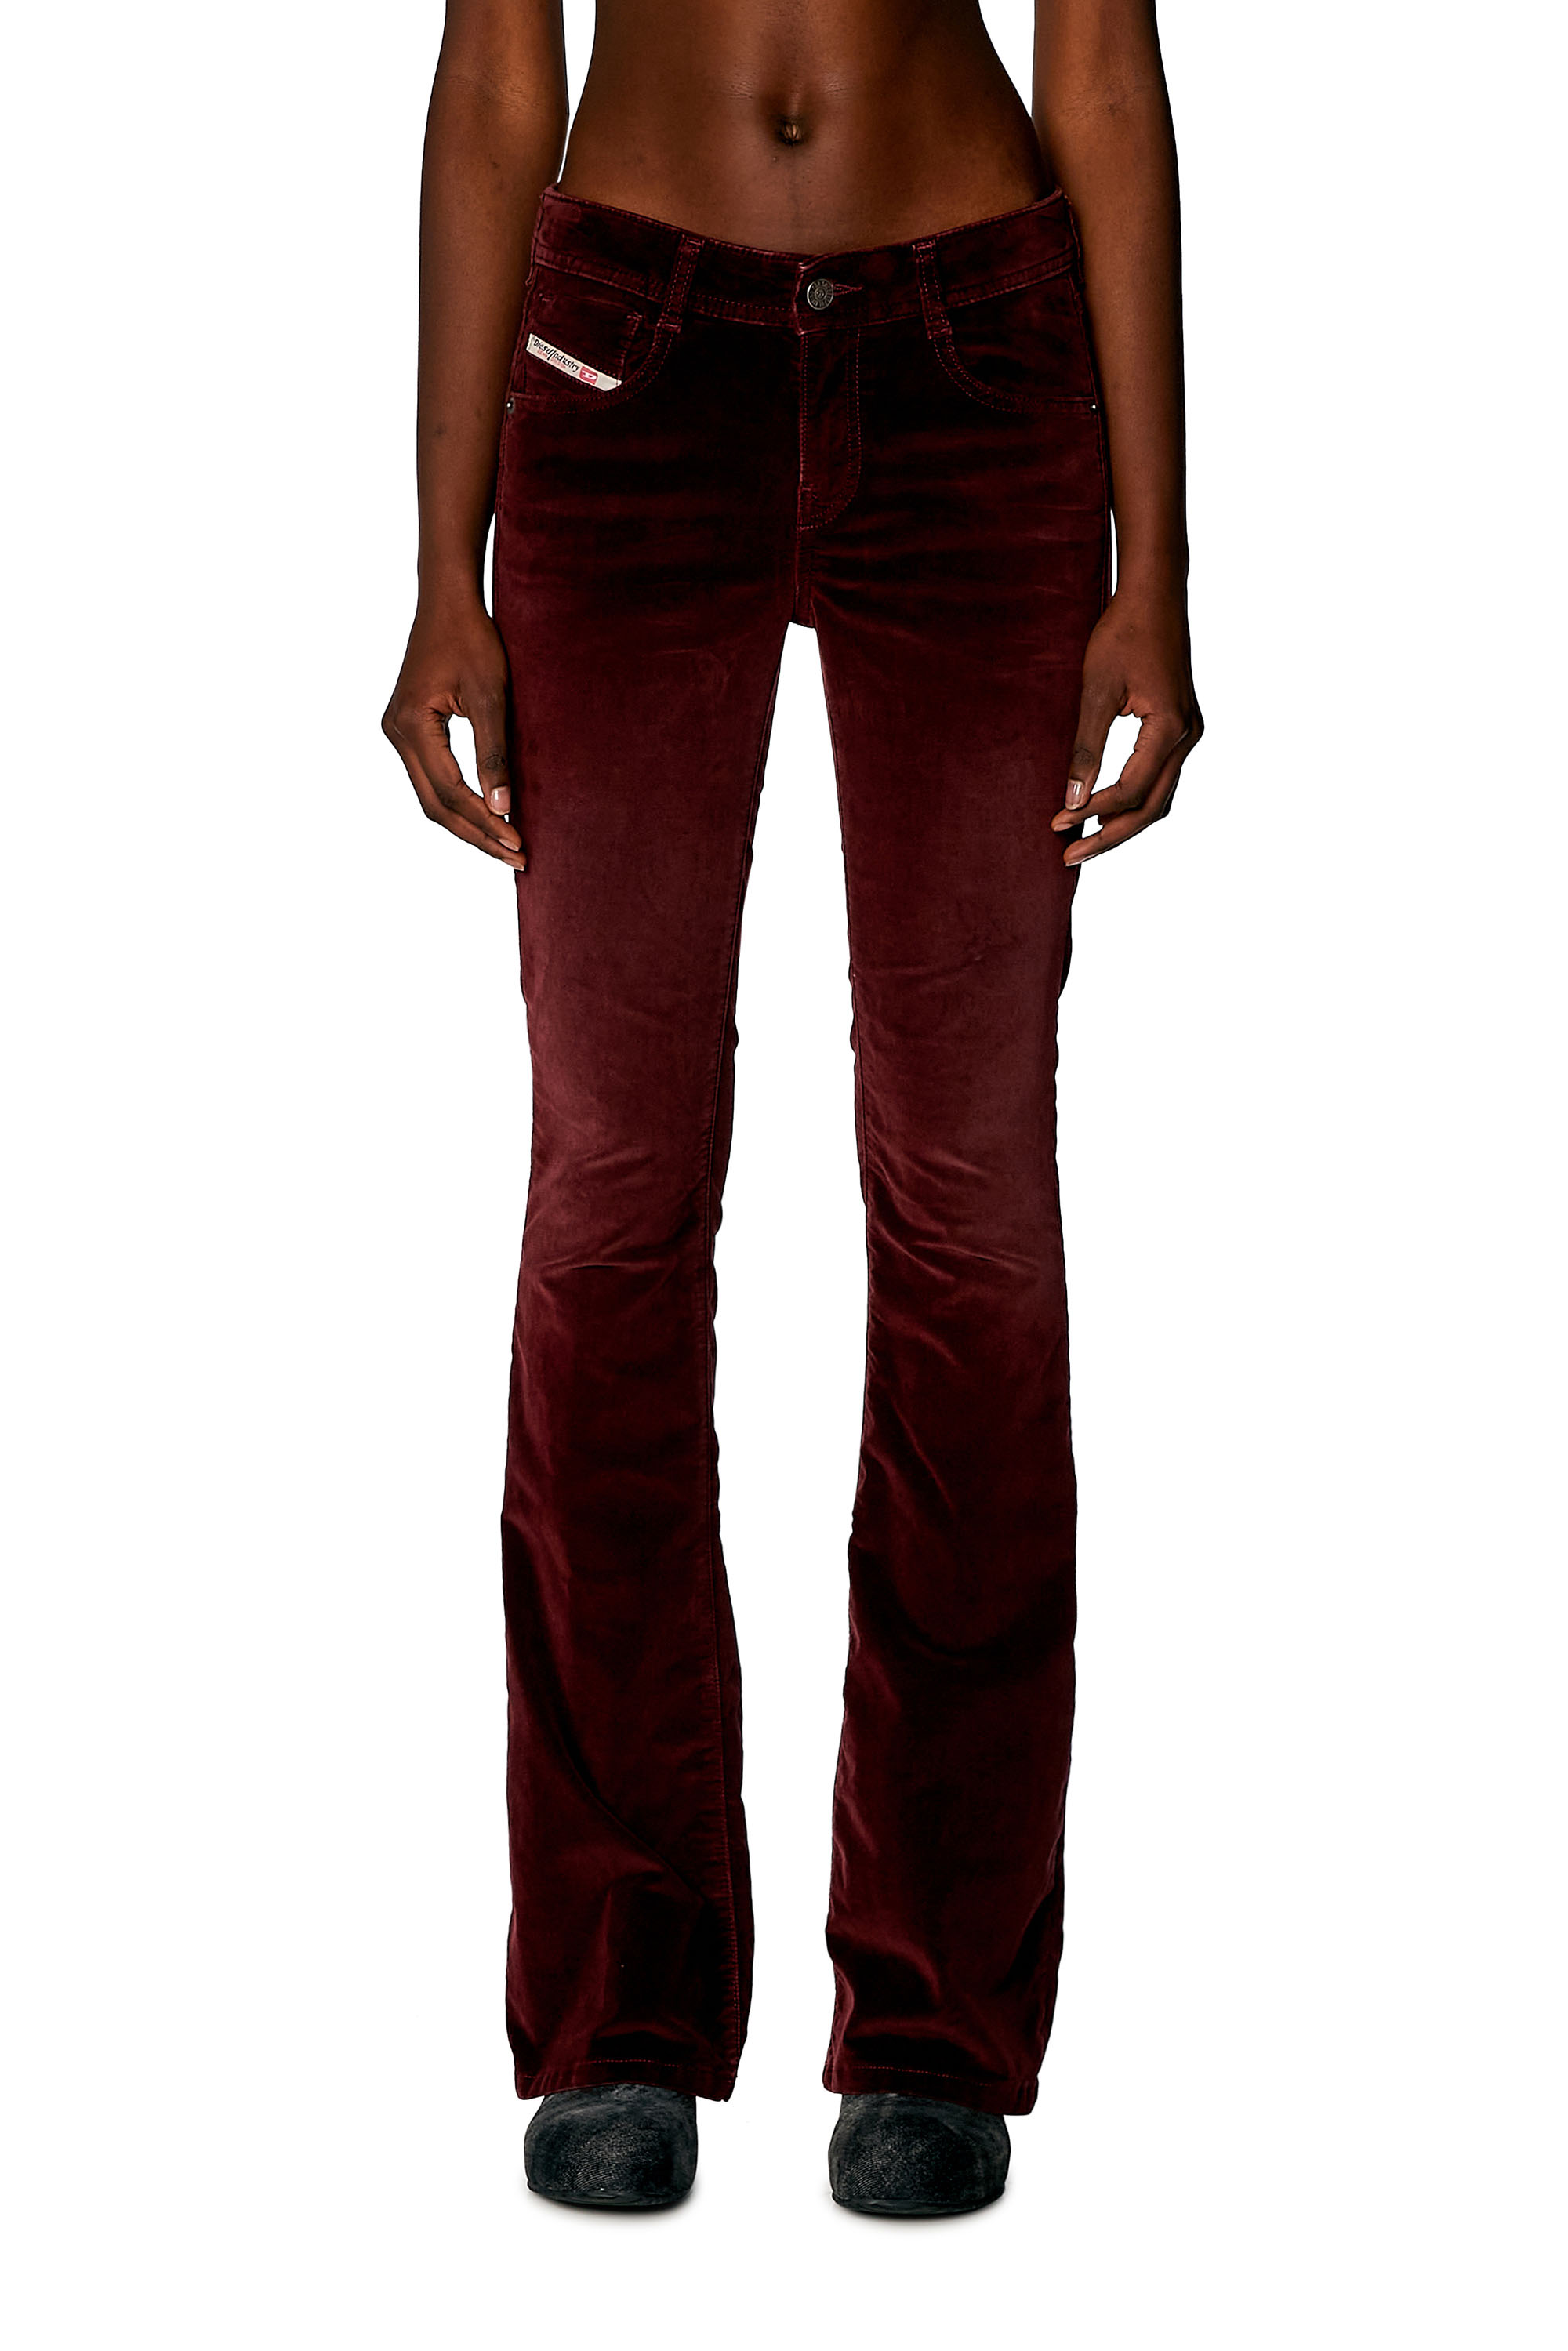 Women Burgundy Belted Top With Bell Bottom Pants